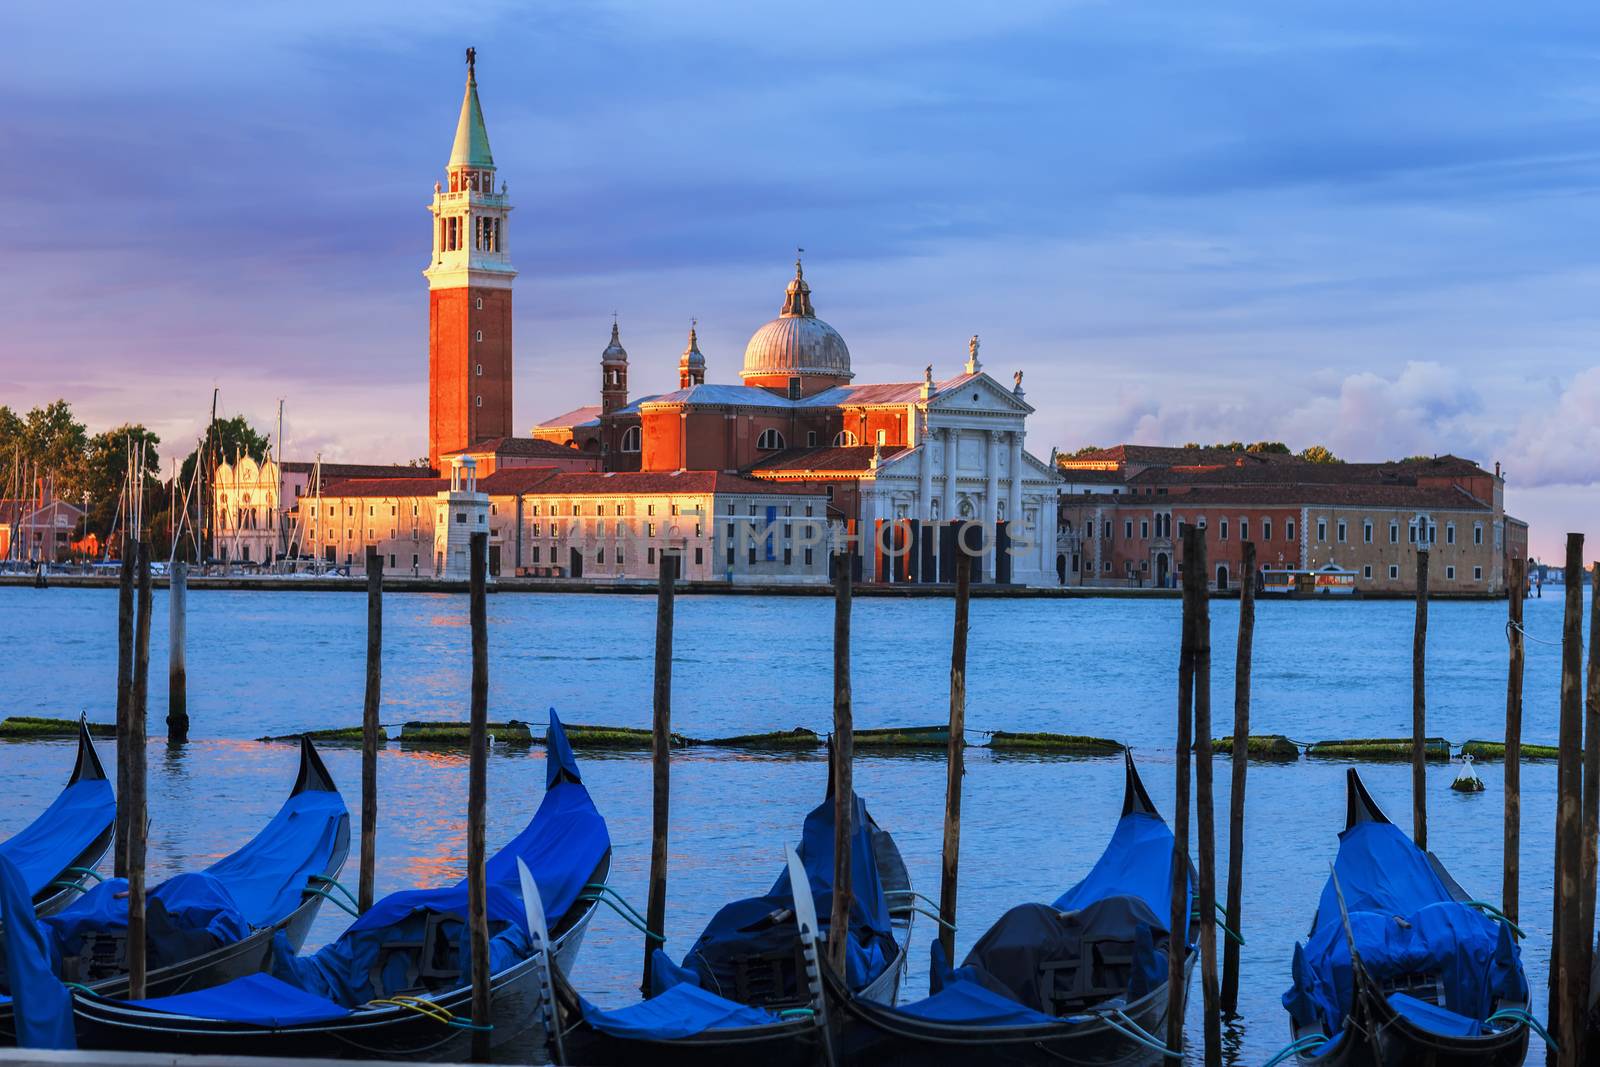 Gondolas in the Grand Canal at sunset, Venice